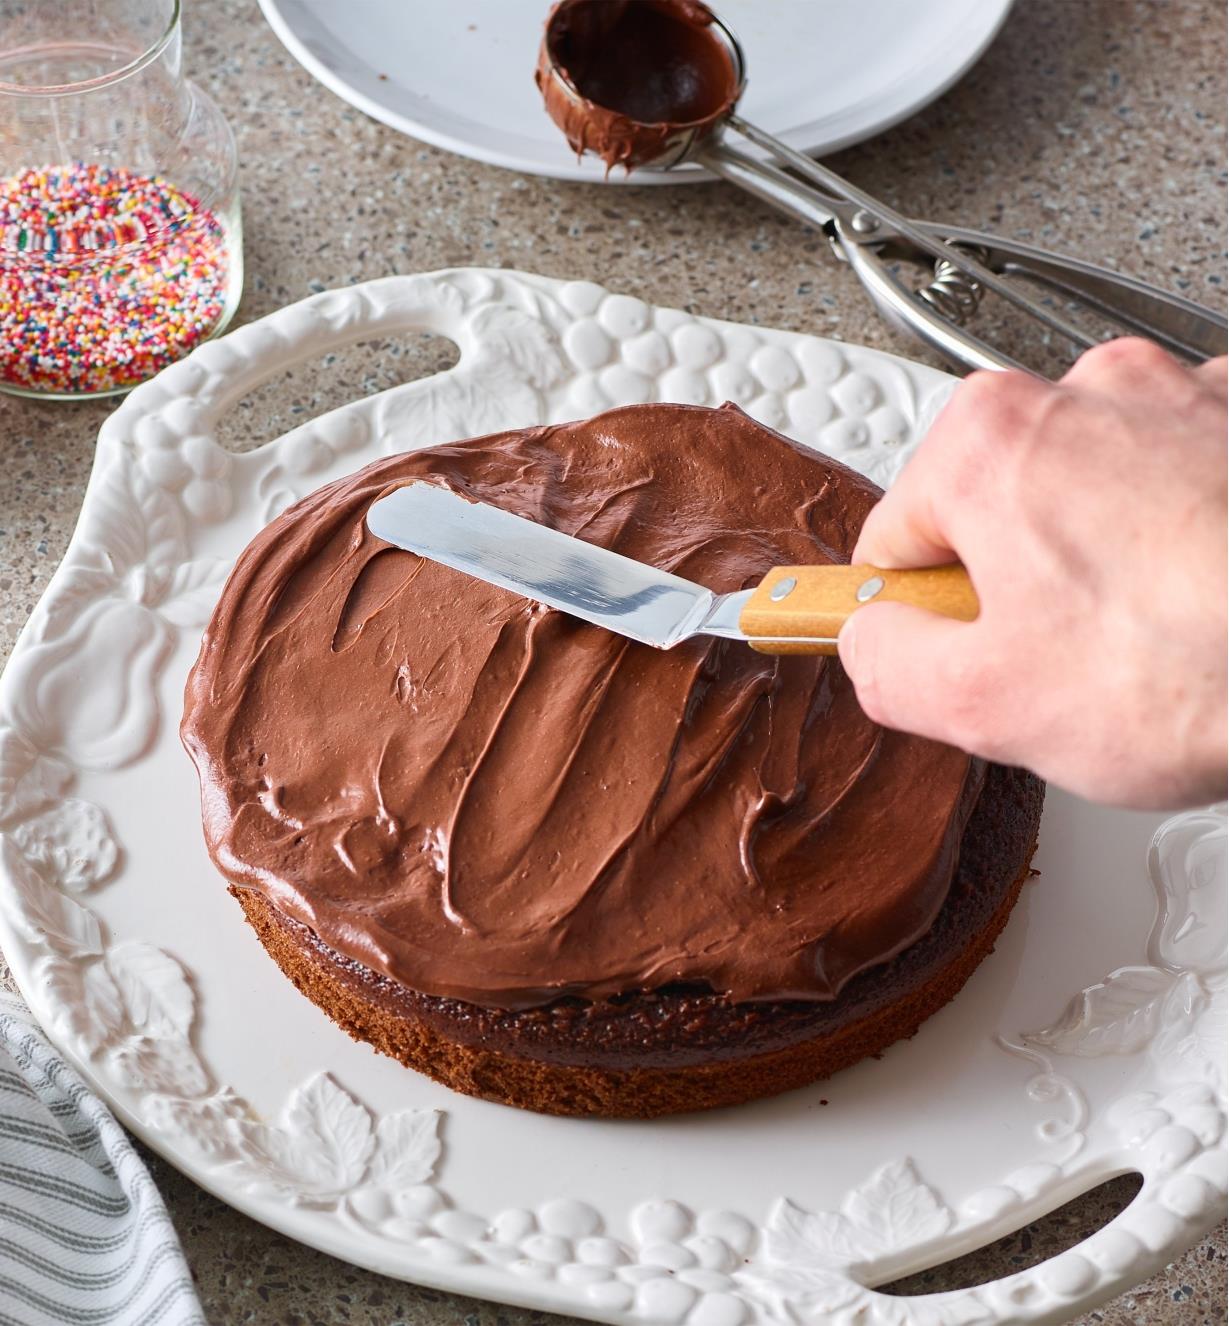 Using the blade of the spatula to spread frosting on a cake